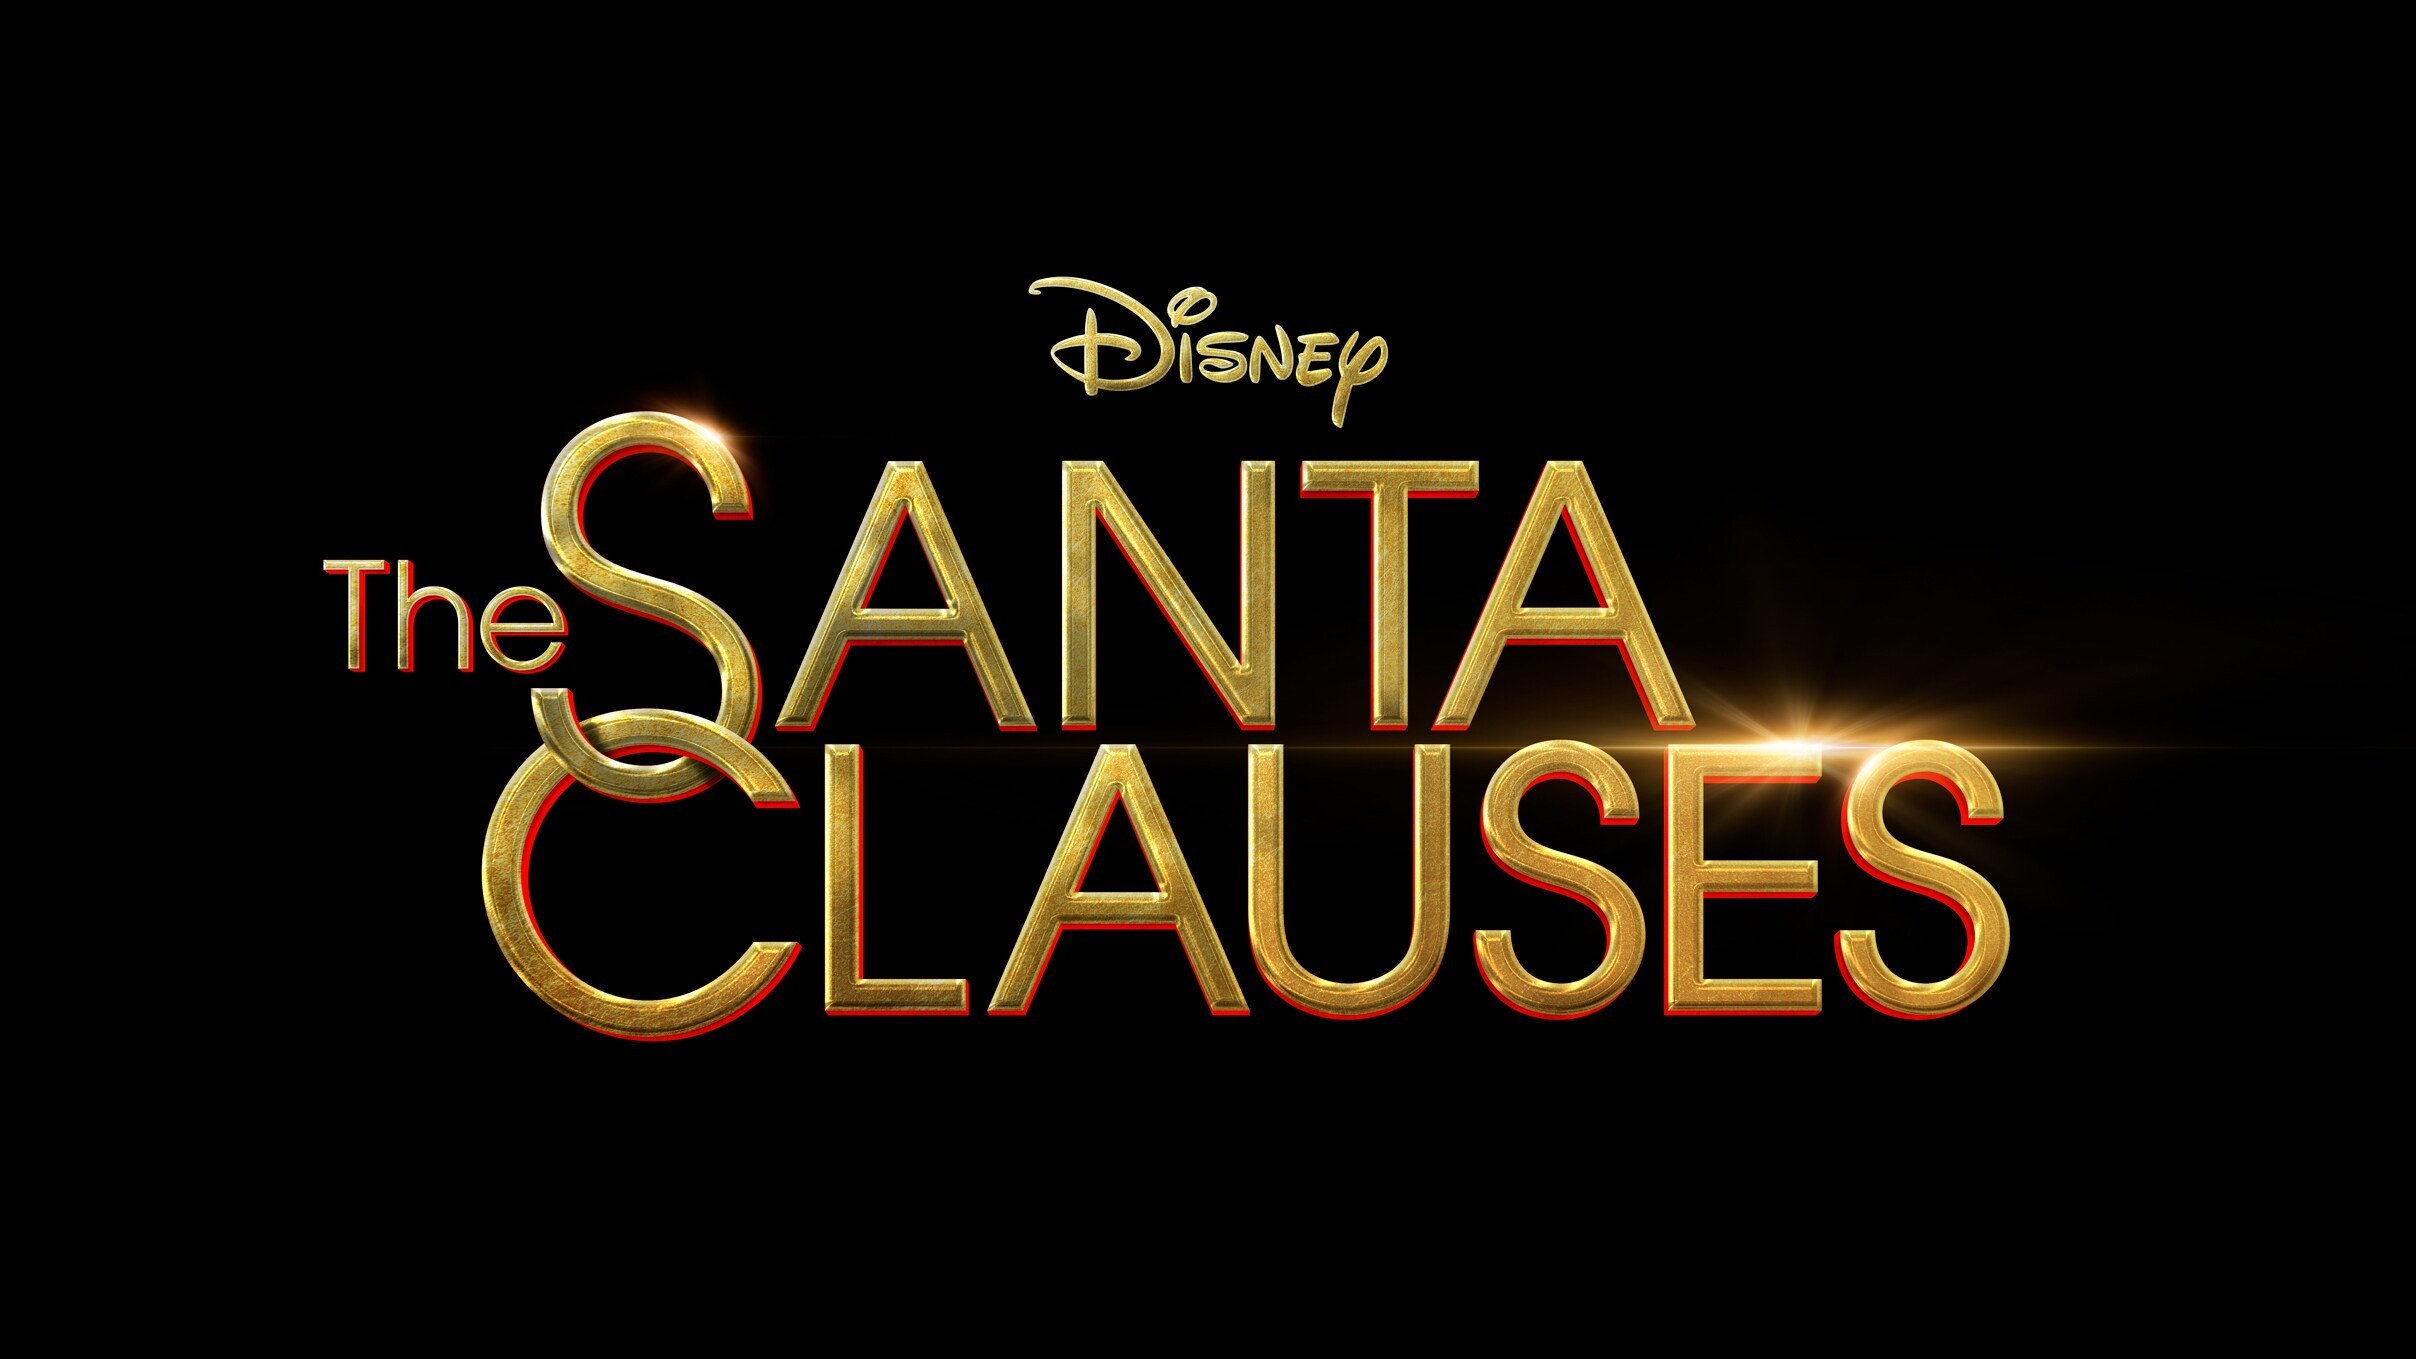 Disney+ Reveals Trailer And Key Art For ‘The Santa Clauses’ Season Two